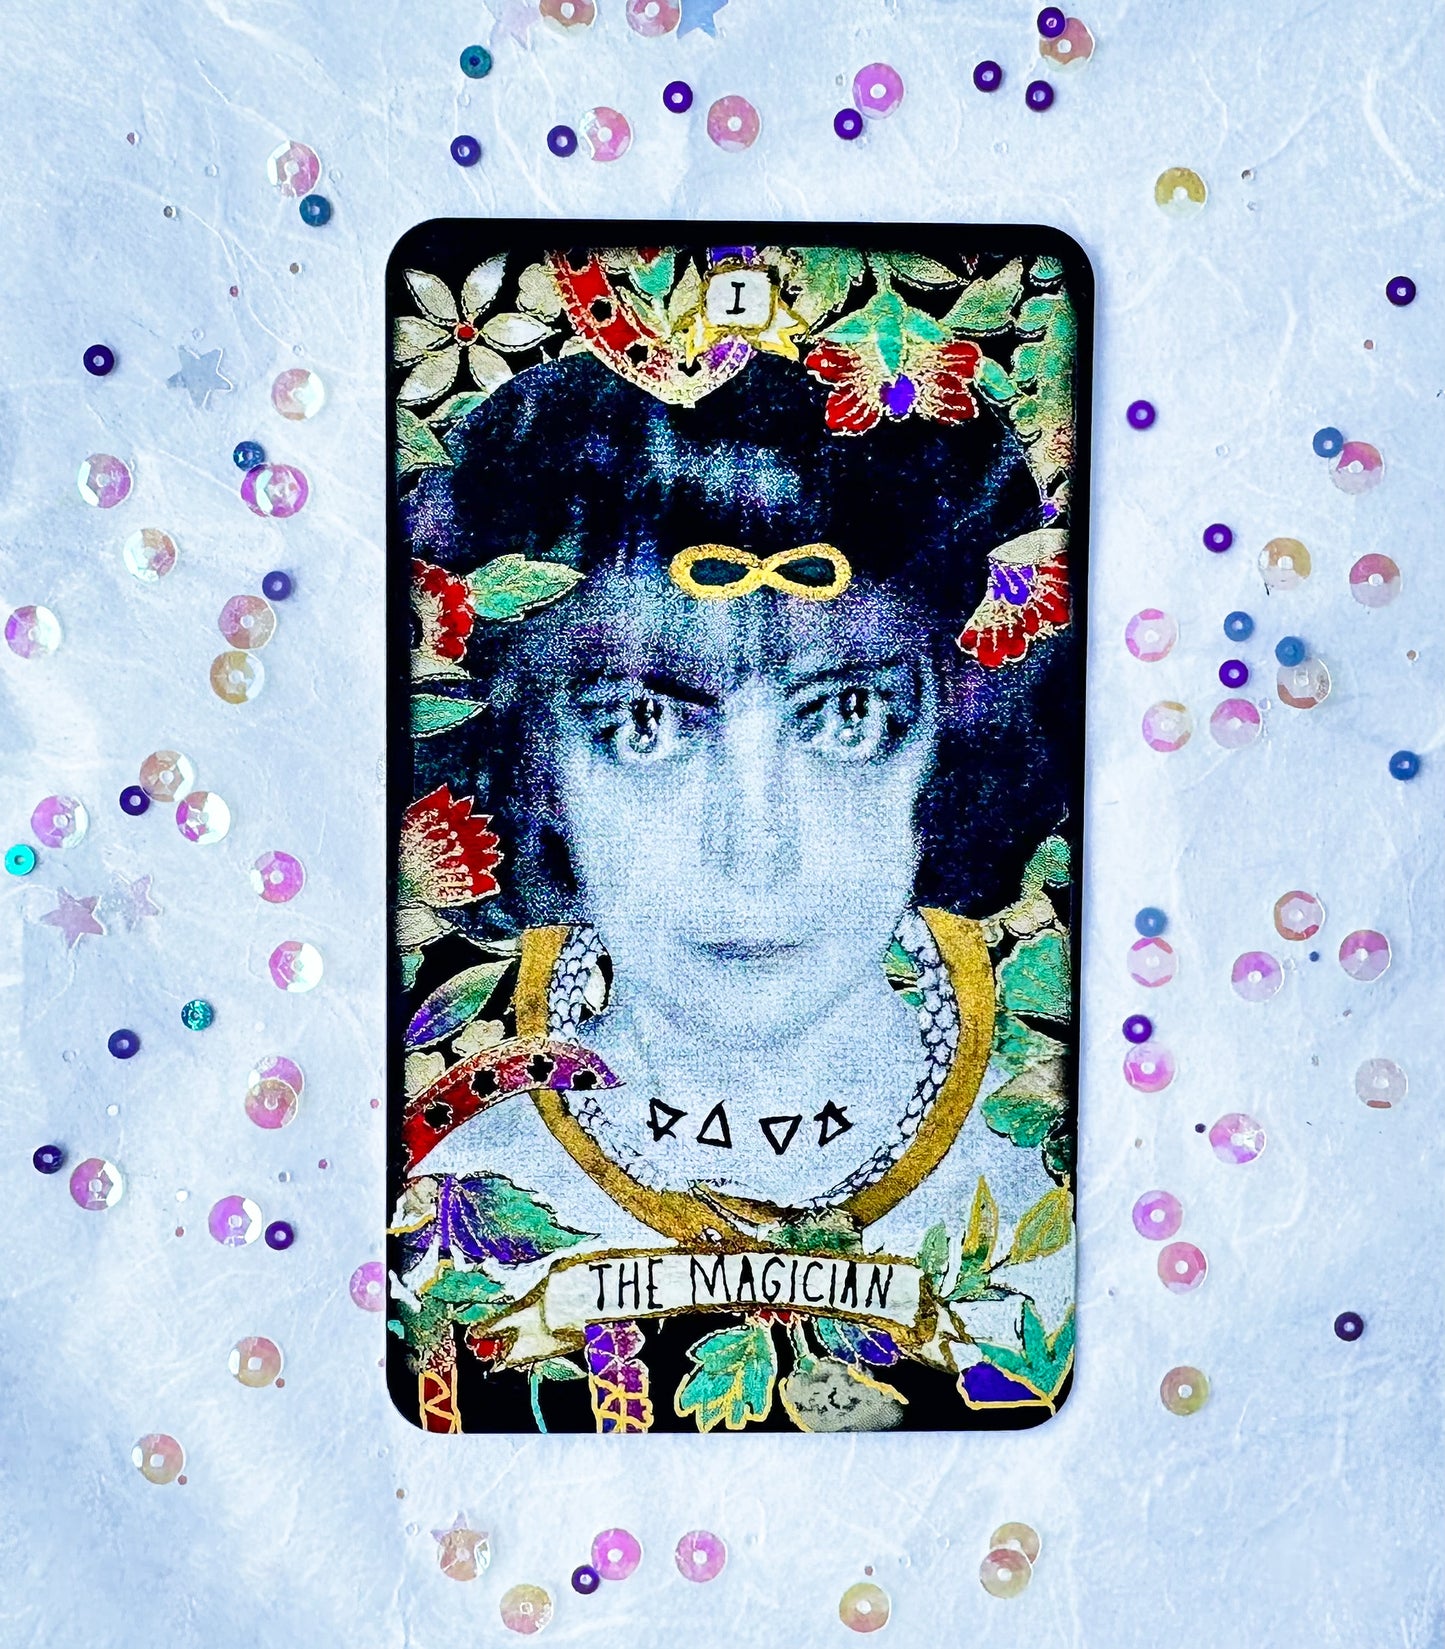 PRE-ORDER: The Guided Hand Tarot